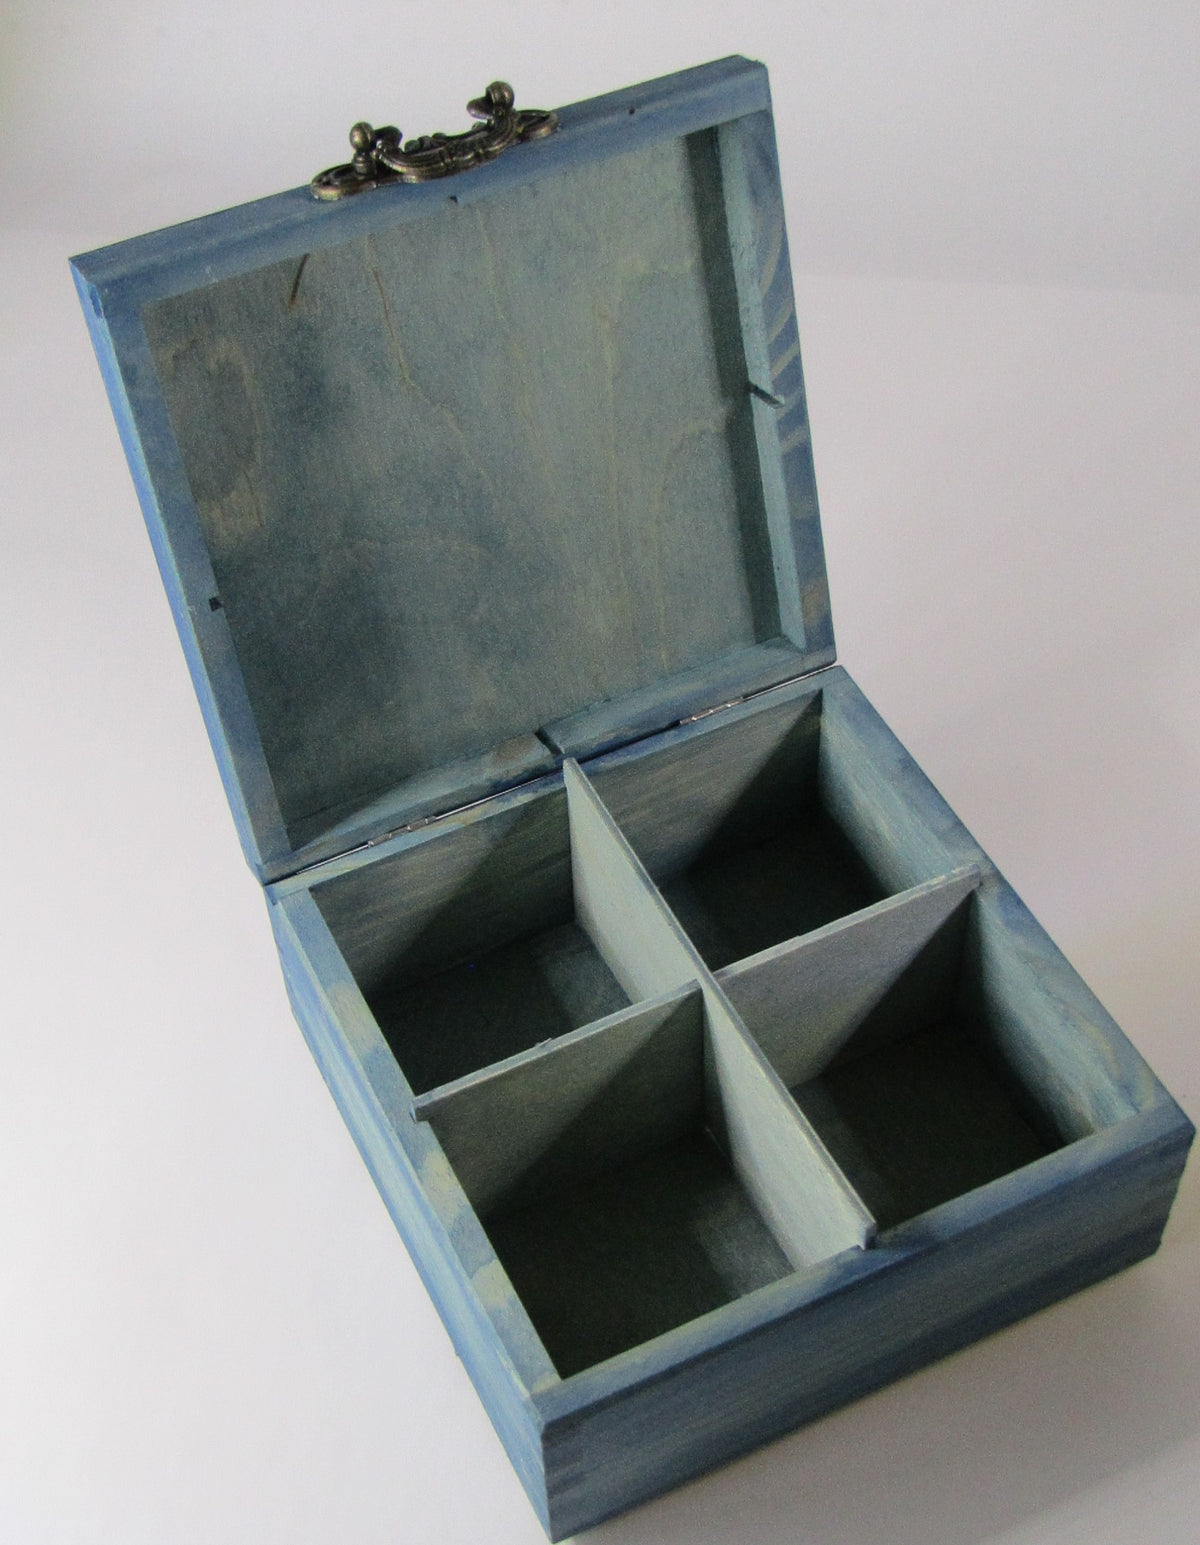 Compartment Box by Monika Maksym features Mark Duffin Artwork